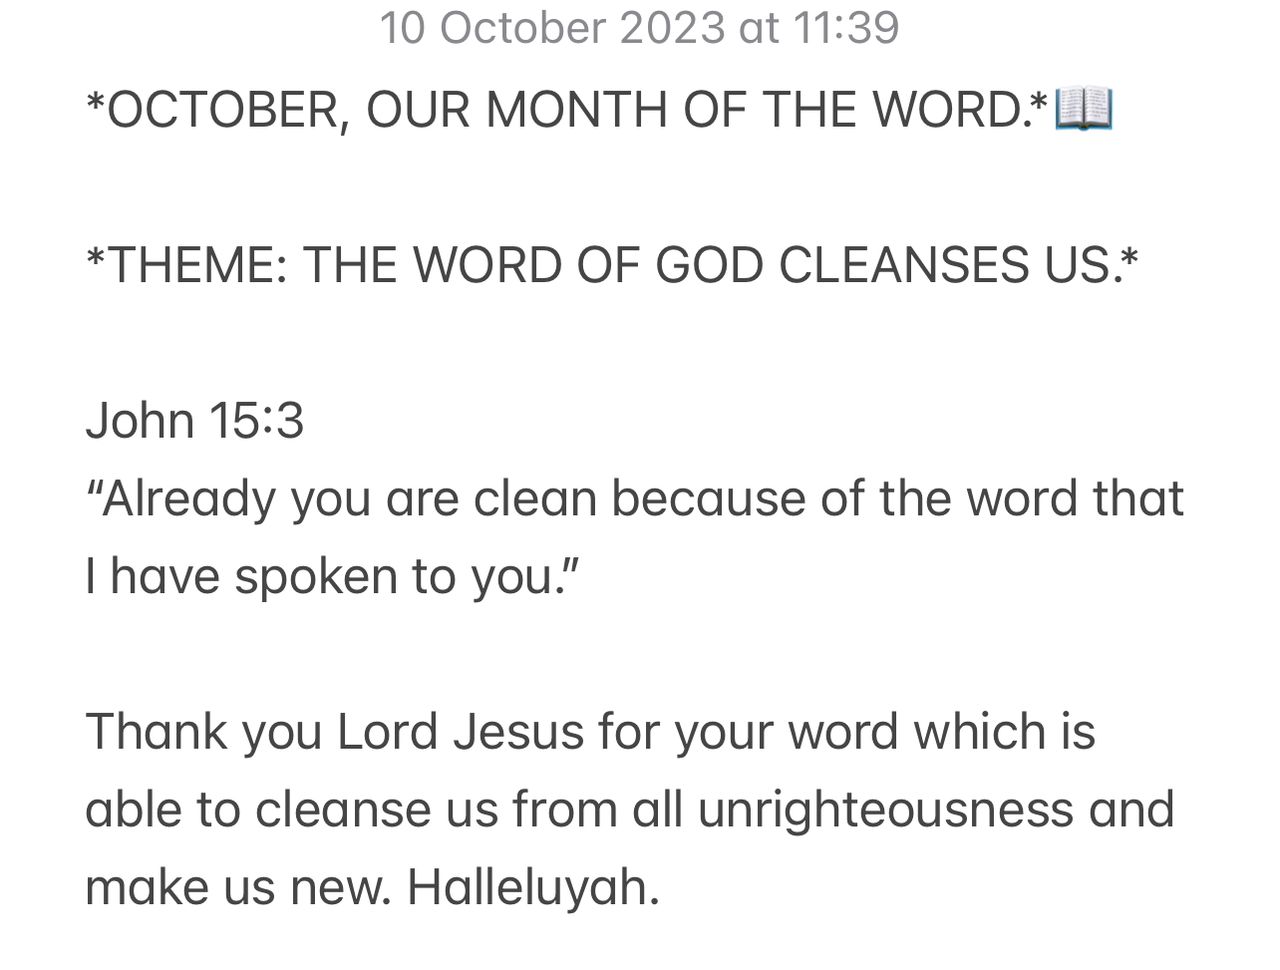 THE WORD OF GOD CLEANSES US